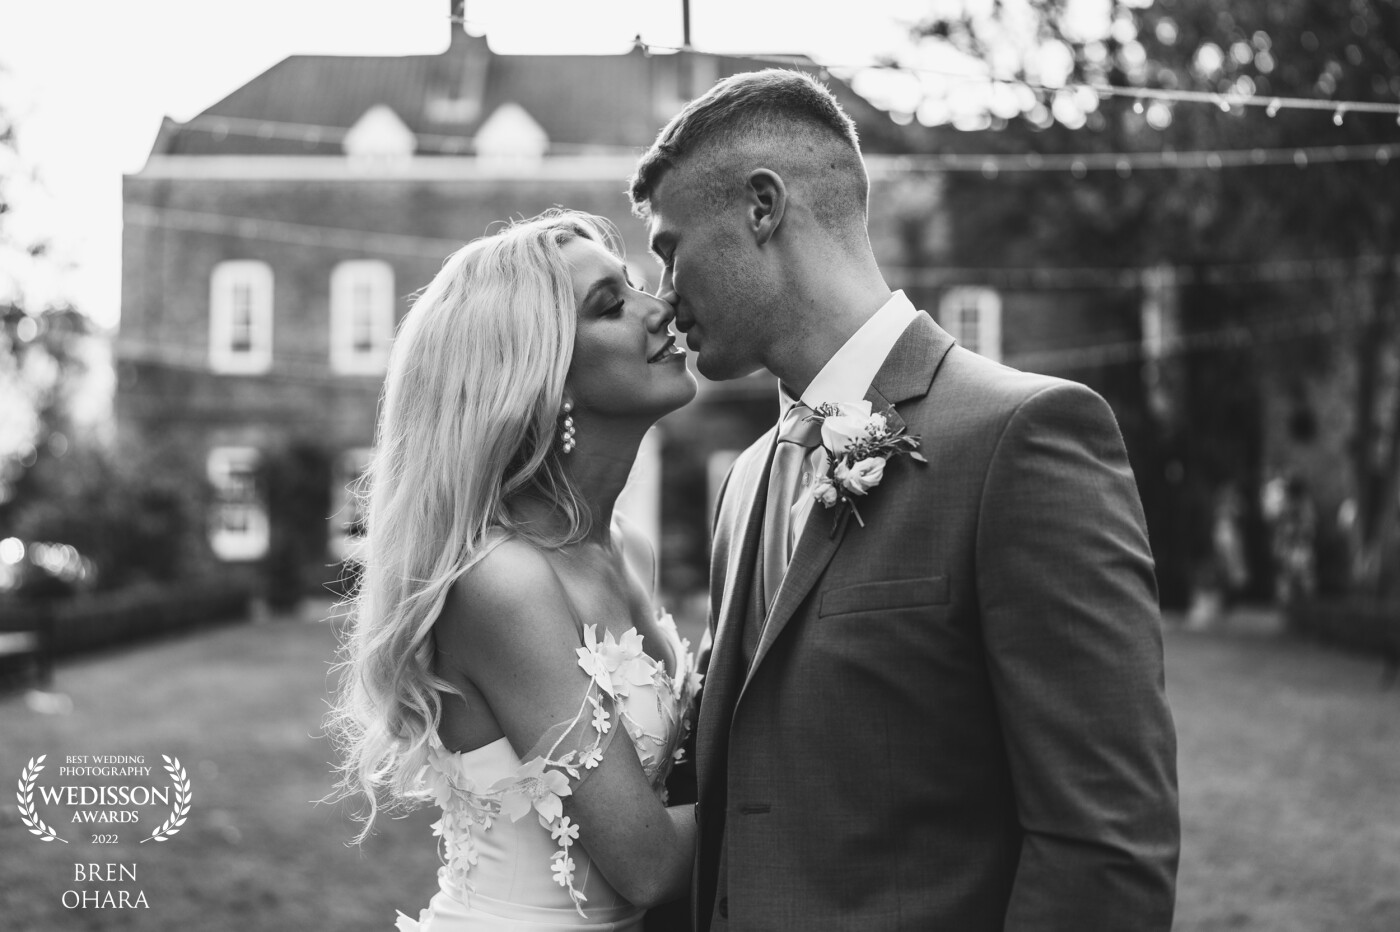 Taken at the wonderful wedding of Mary and Connor. The wedding was held at the beautiful Bardney Hall, Barton-upon-Humber. Mary and Connor are so photogenic that they made it very easy to capture this.